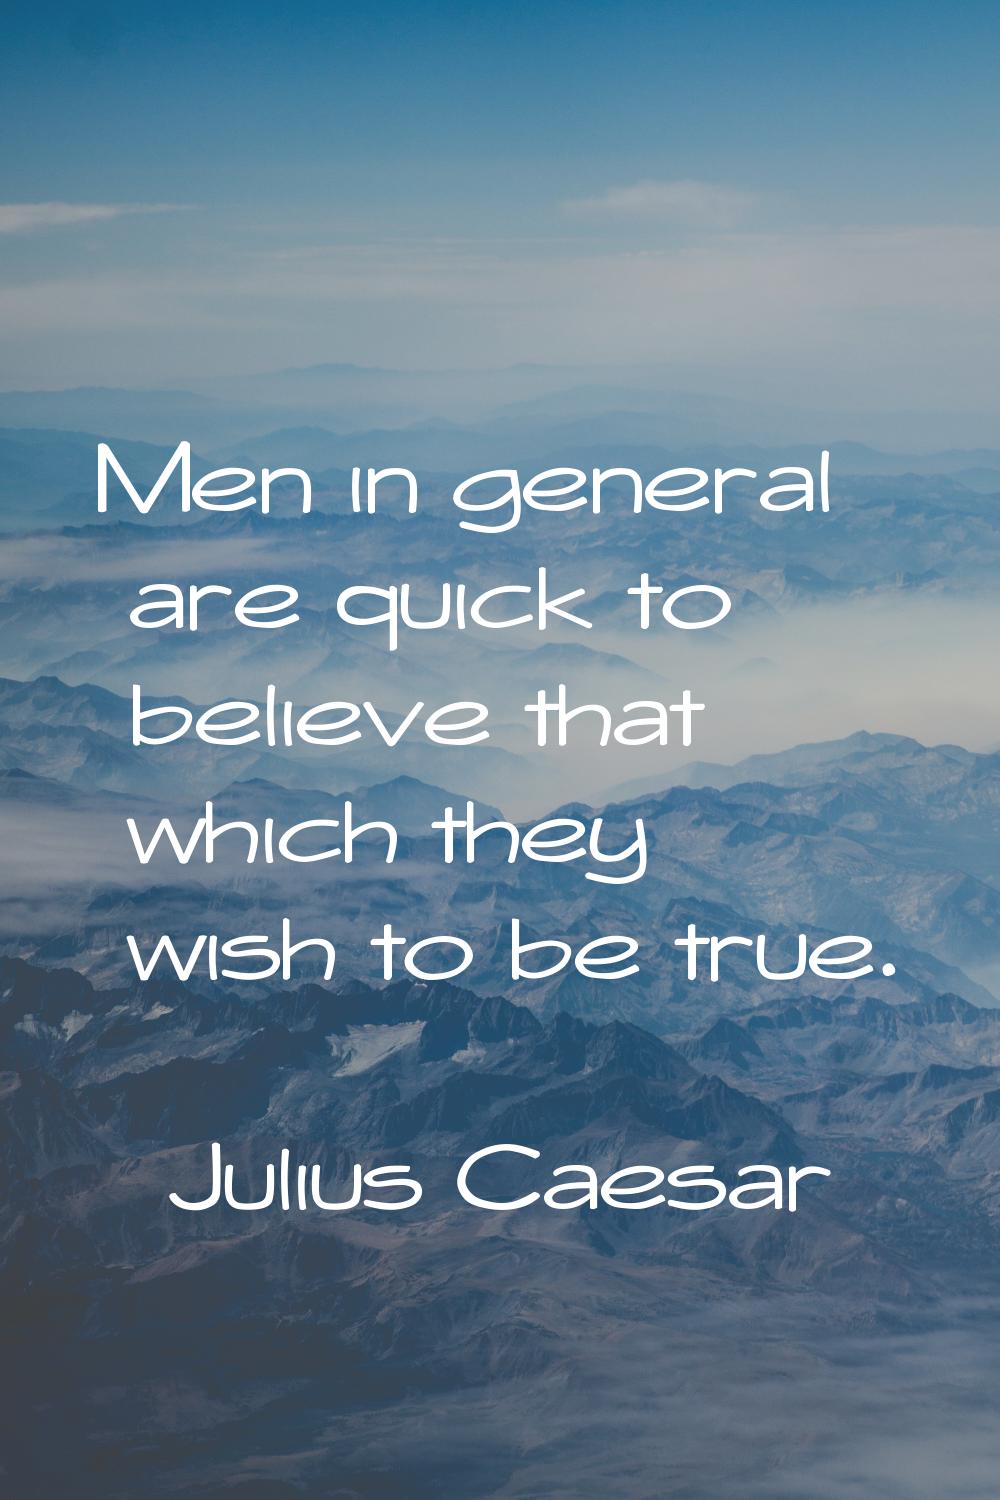 Men in general are quick to believe that which they wish to be true.